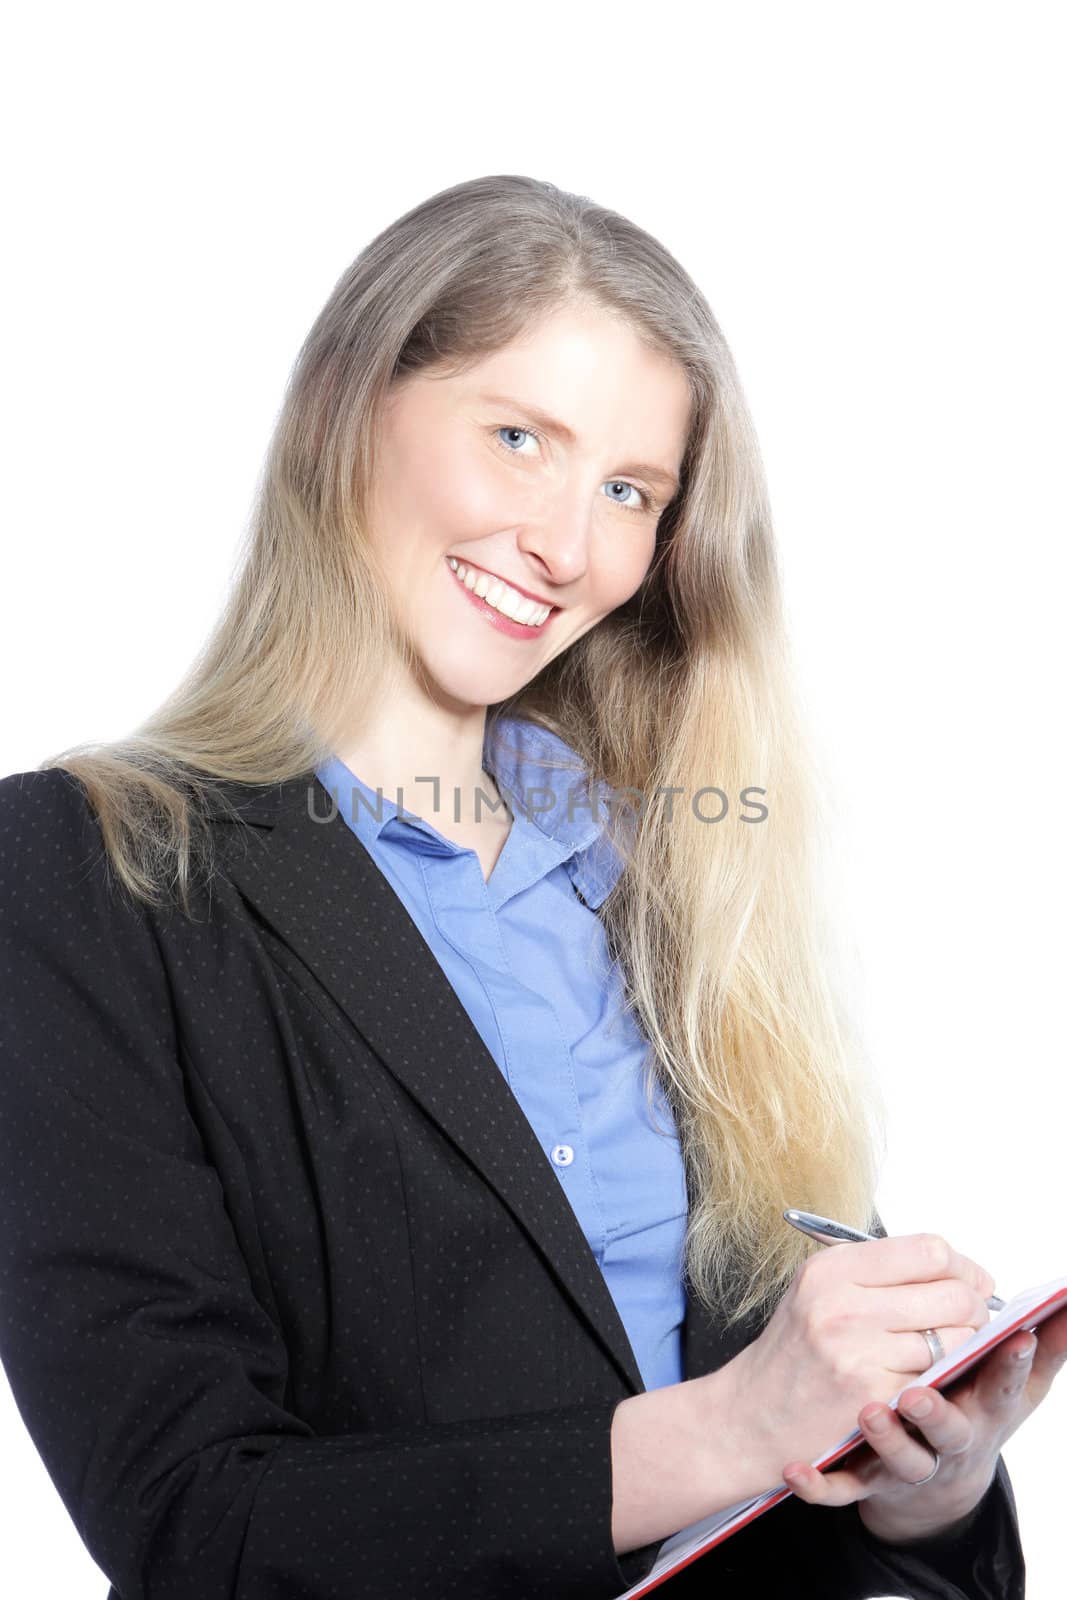 Smiling businesswoman with long blonde hair standing writing notes on a handheld clipboard